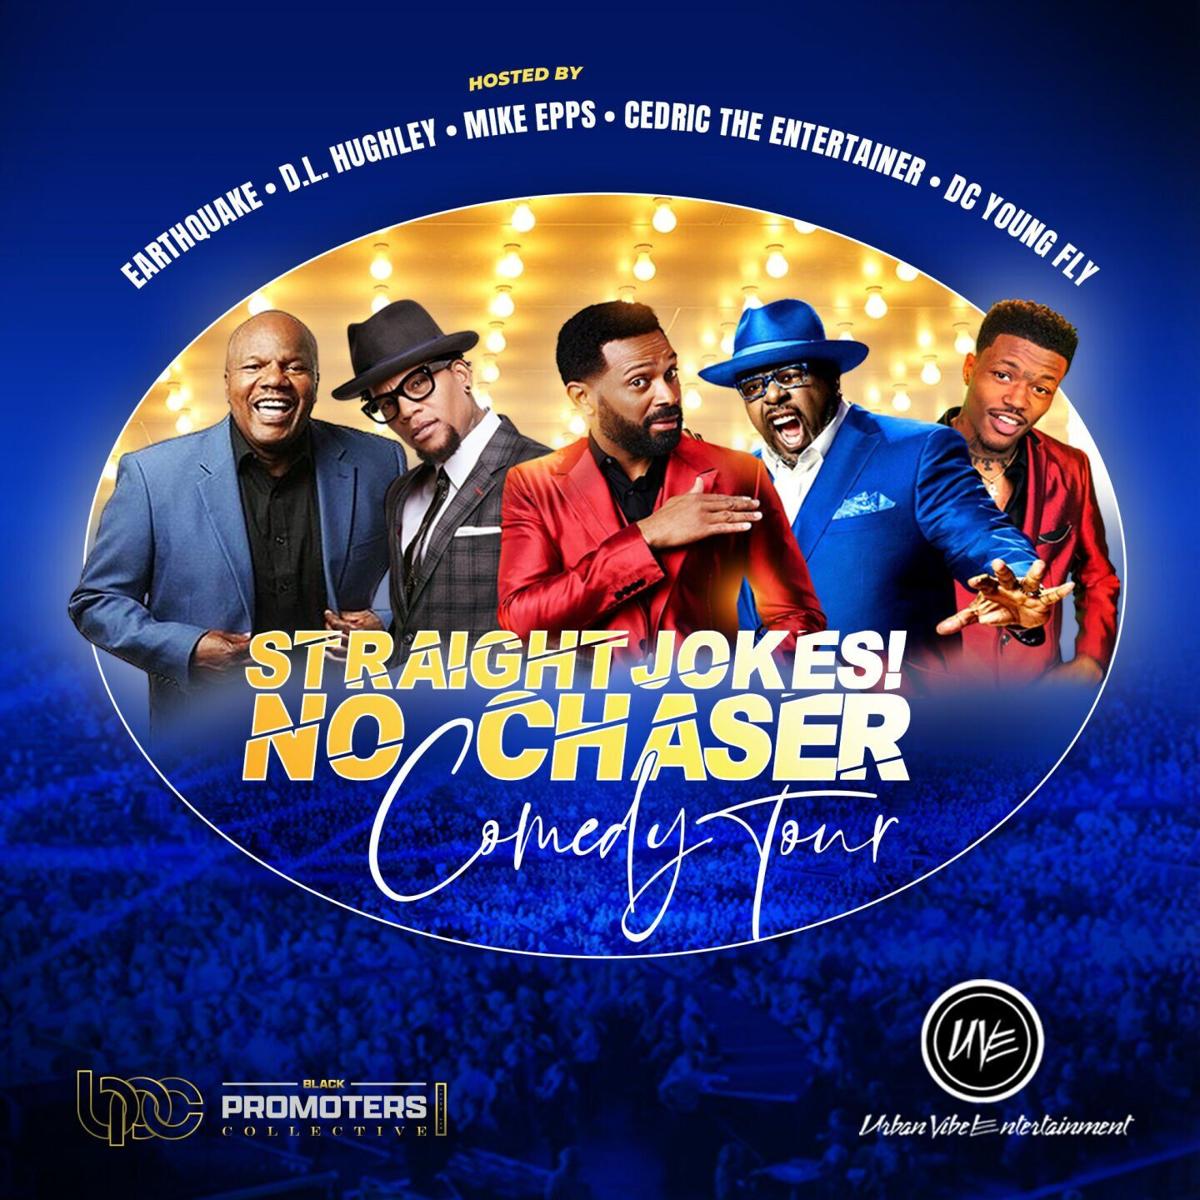 Straight Jokes No Chaser: Mike Epps, Cedric The Entertainer, D.L. Hughley, Earthquake & DC Young Fly at PNC Arena